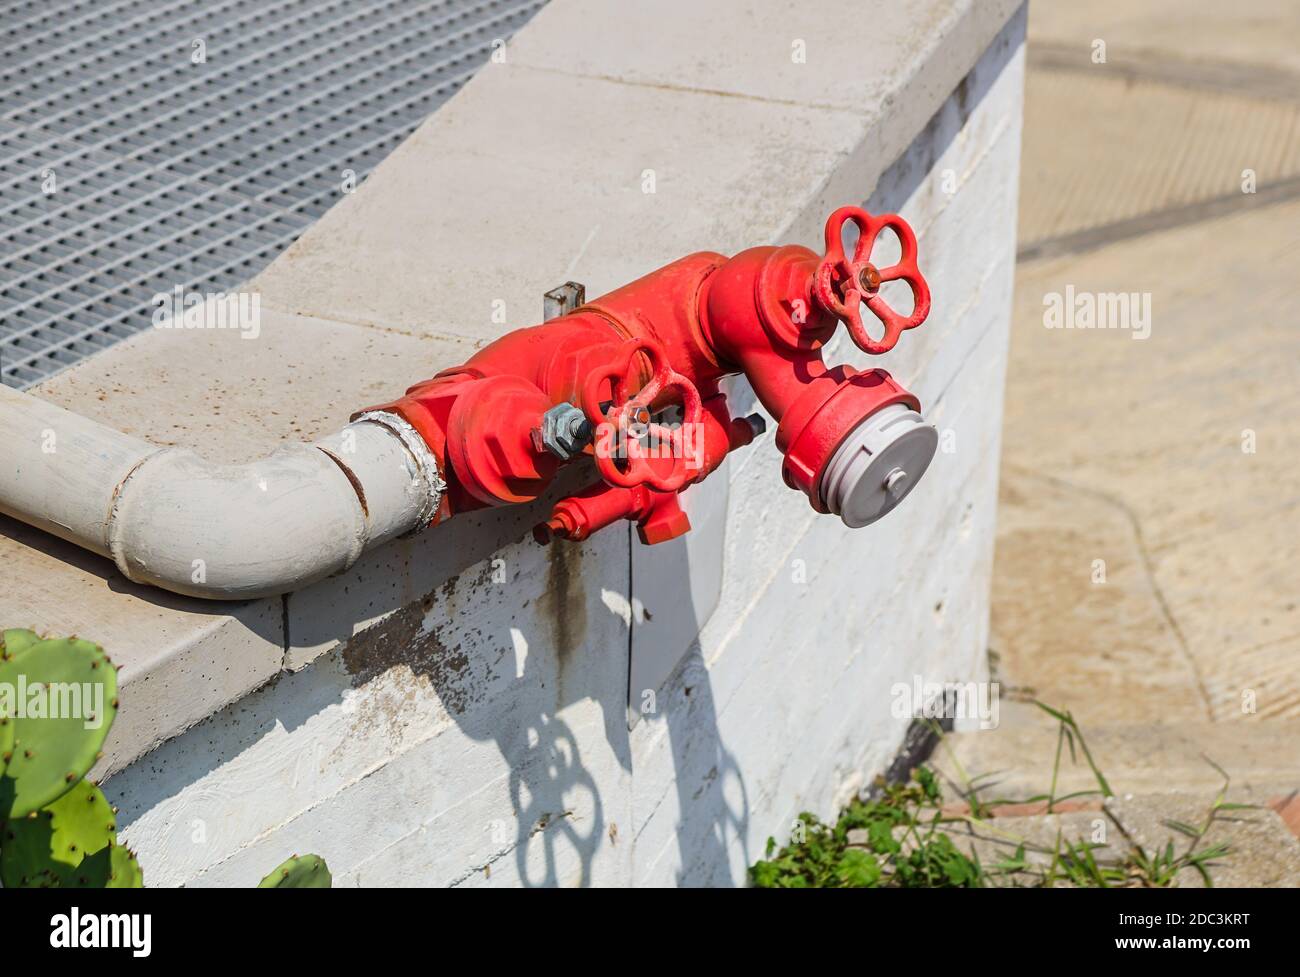 Old red fire hydrant in the street. Fire hidrant for emergency fire access Stock Photo